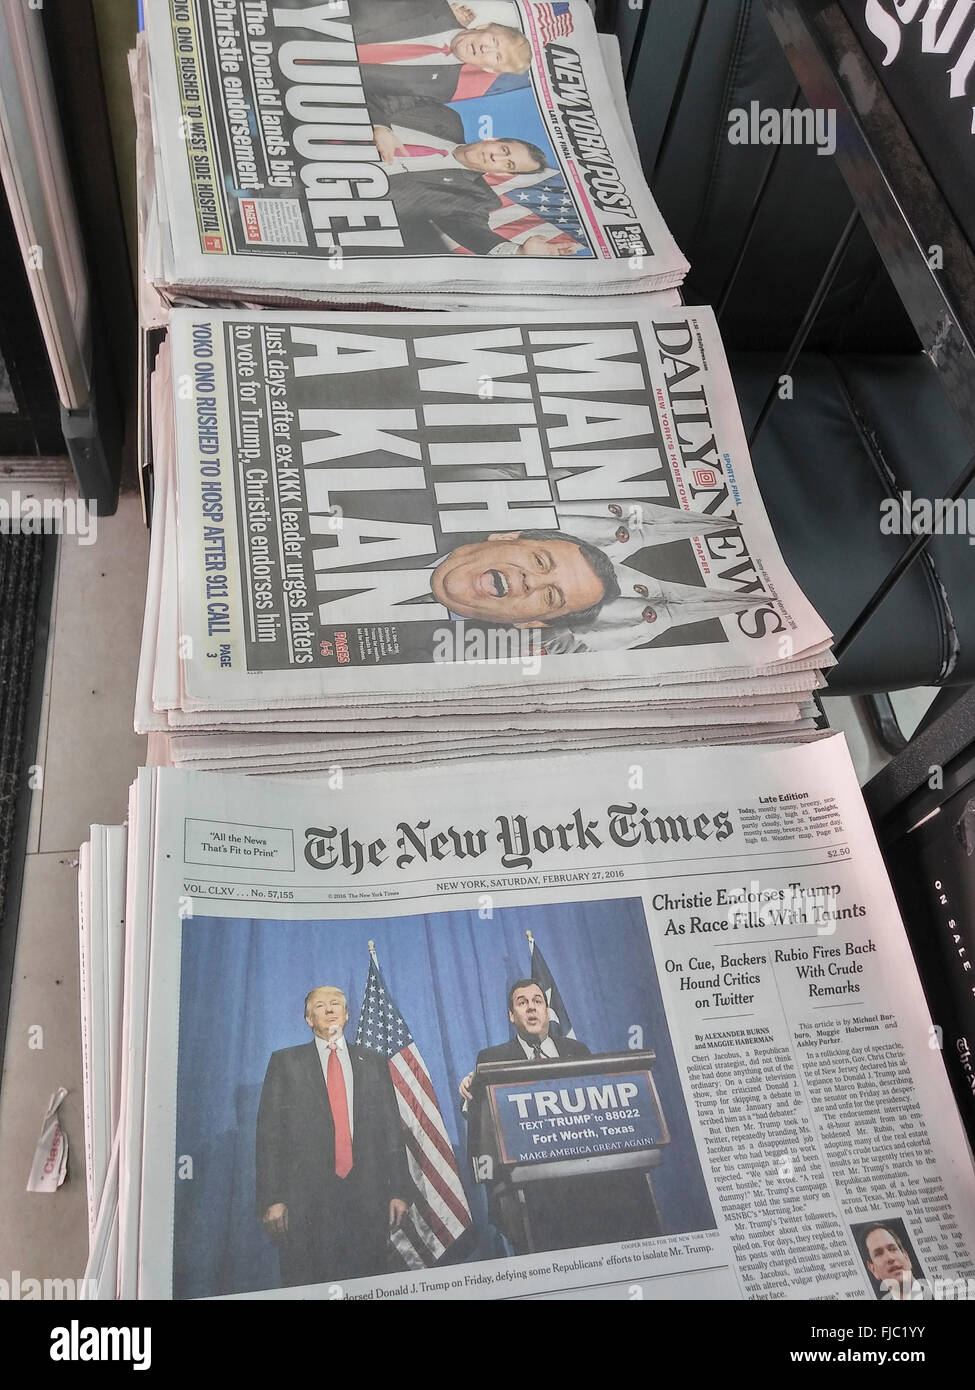 New York newspapers on Saturday, February 27, 2016 report on former presidential candidate and New Jersey Governor Chris Christie's endorsement of U.S. presidential candidate Donald Trump (© Richard B. Levine) Stock Photo